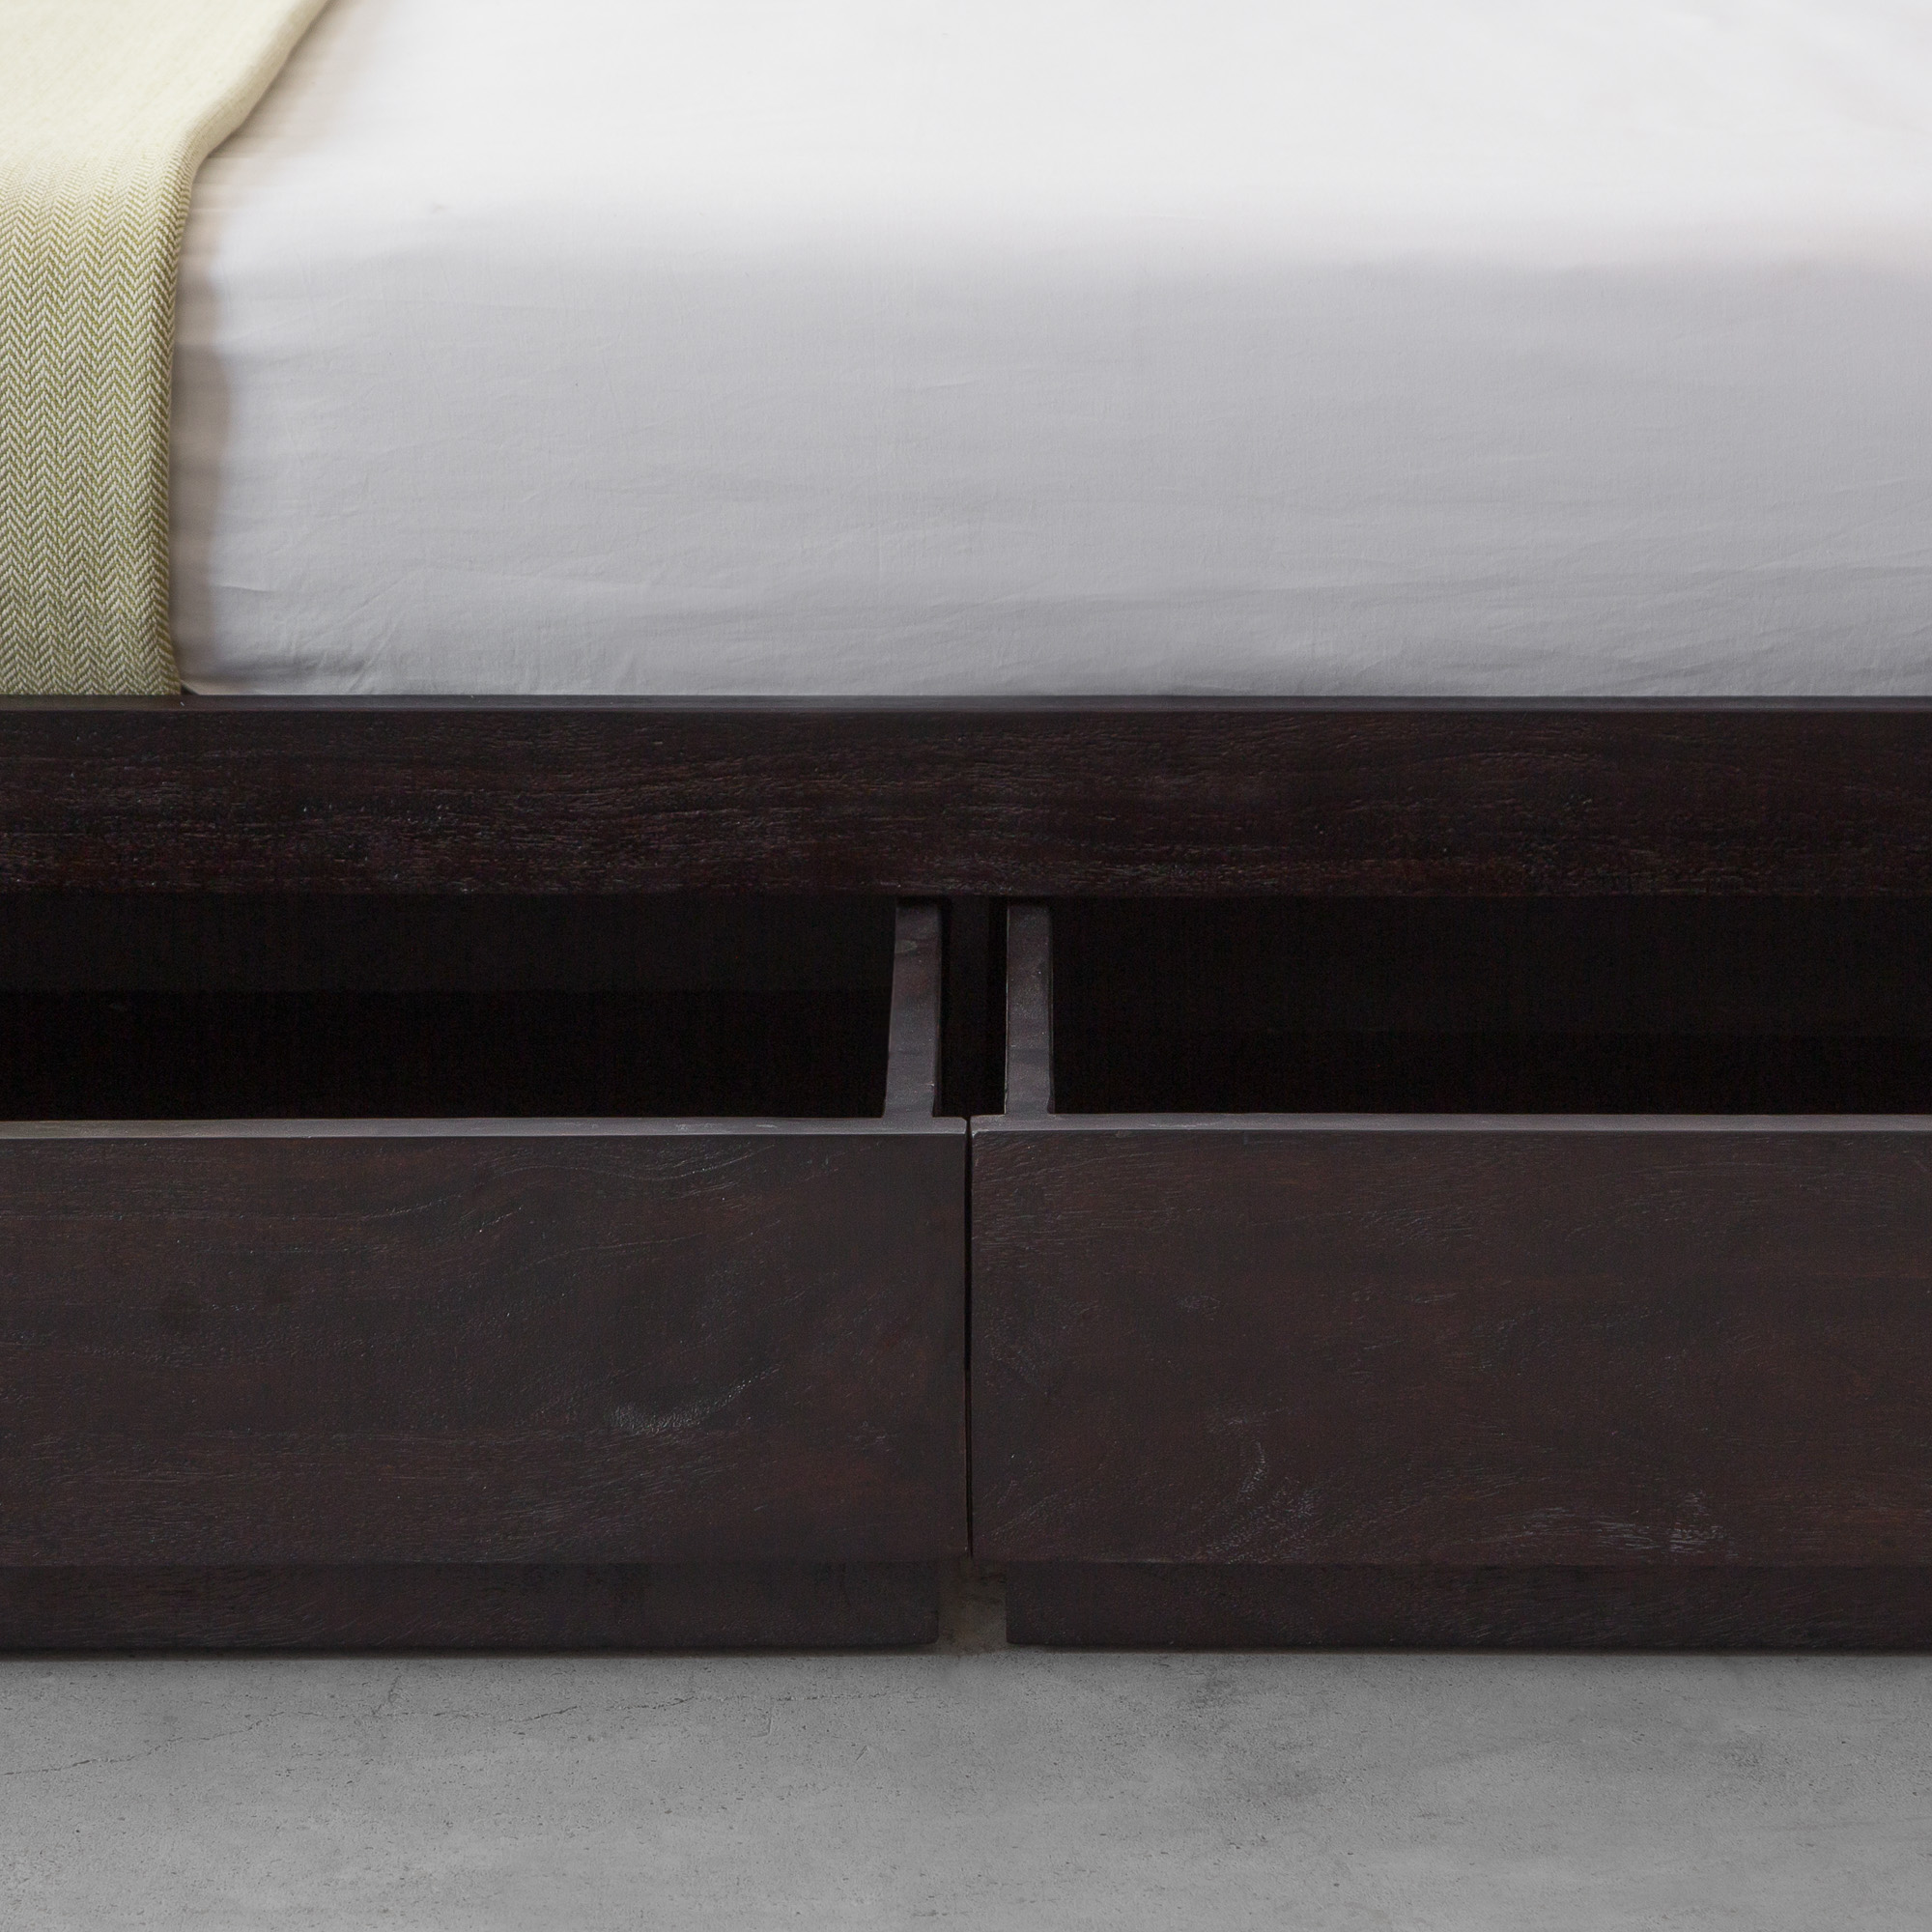 EDWARD BED COLLECTION - SINGLE BED